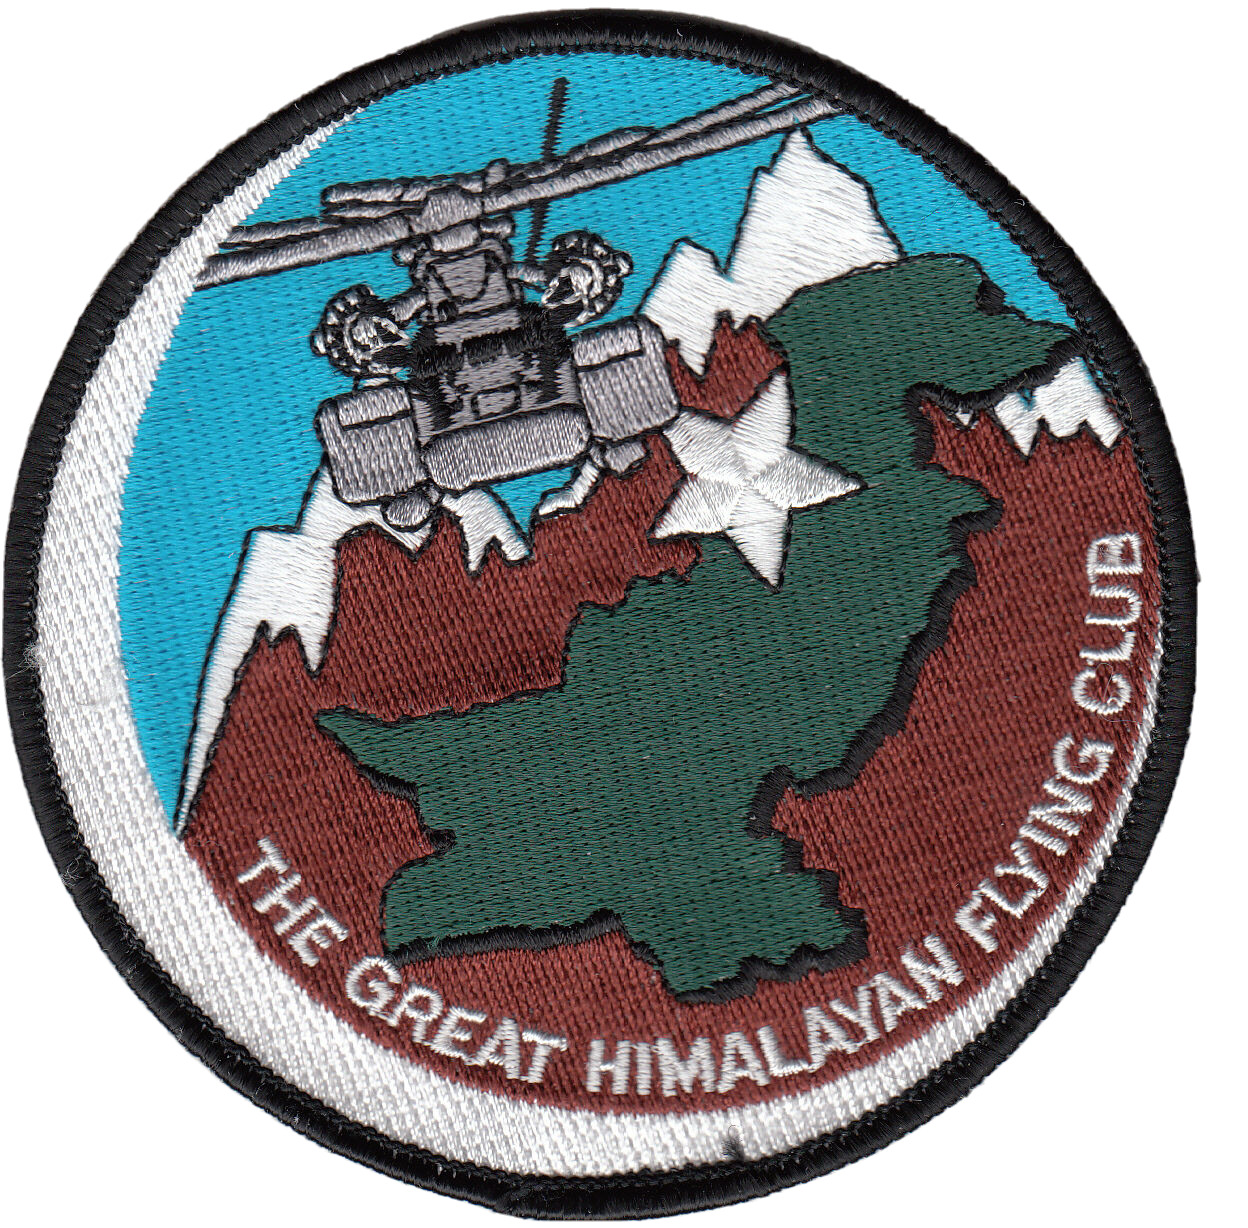 HM-14 THE GREAT HIMALAYAN FLYING CLUB PATCH 